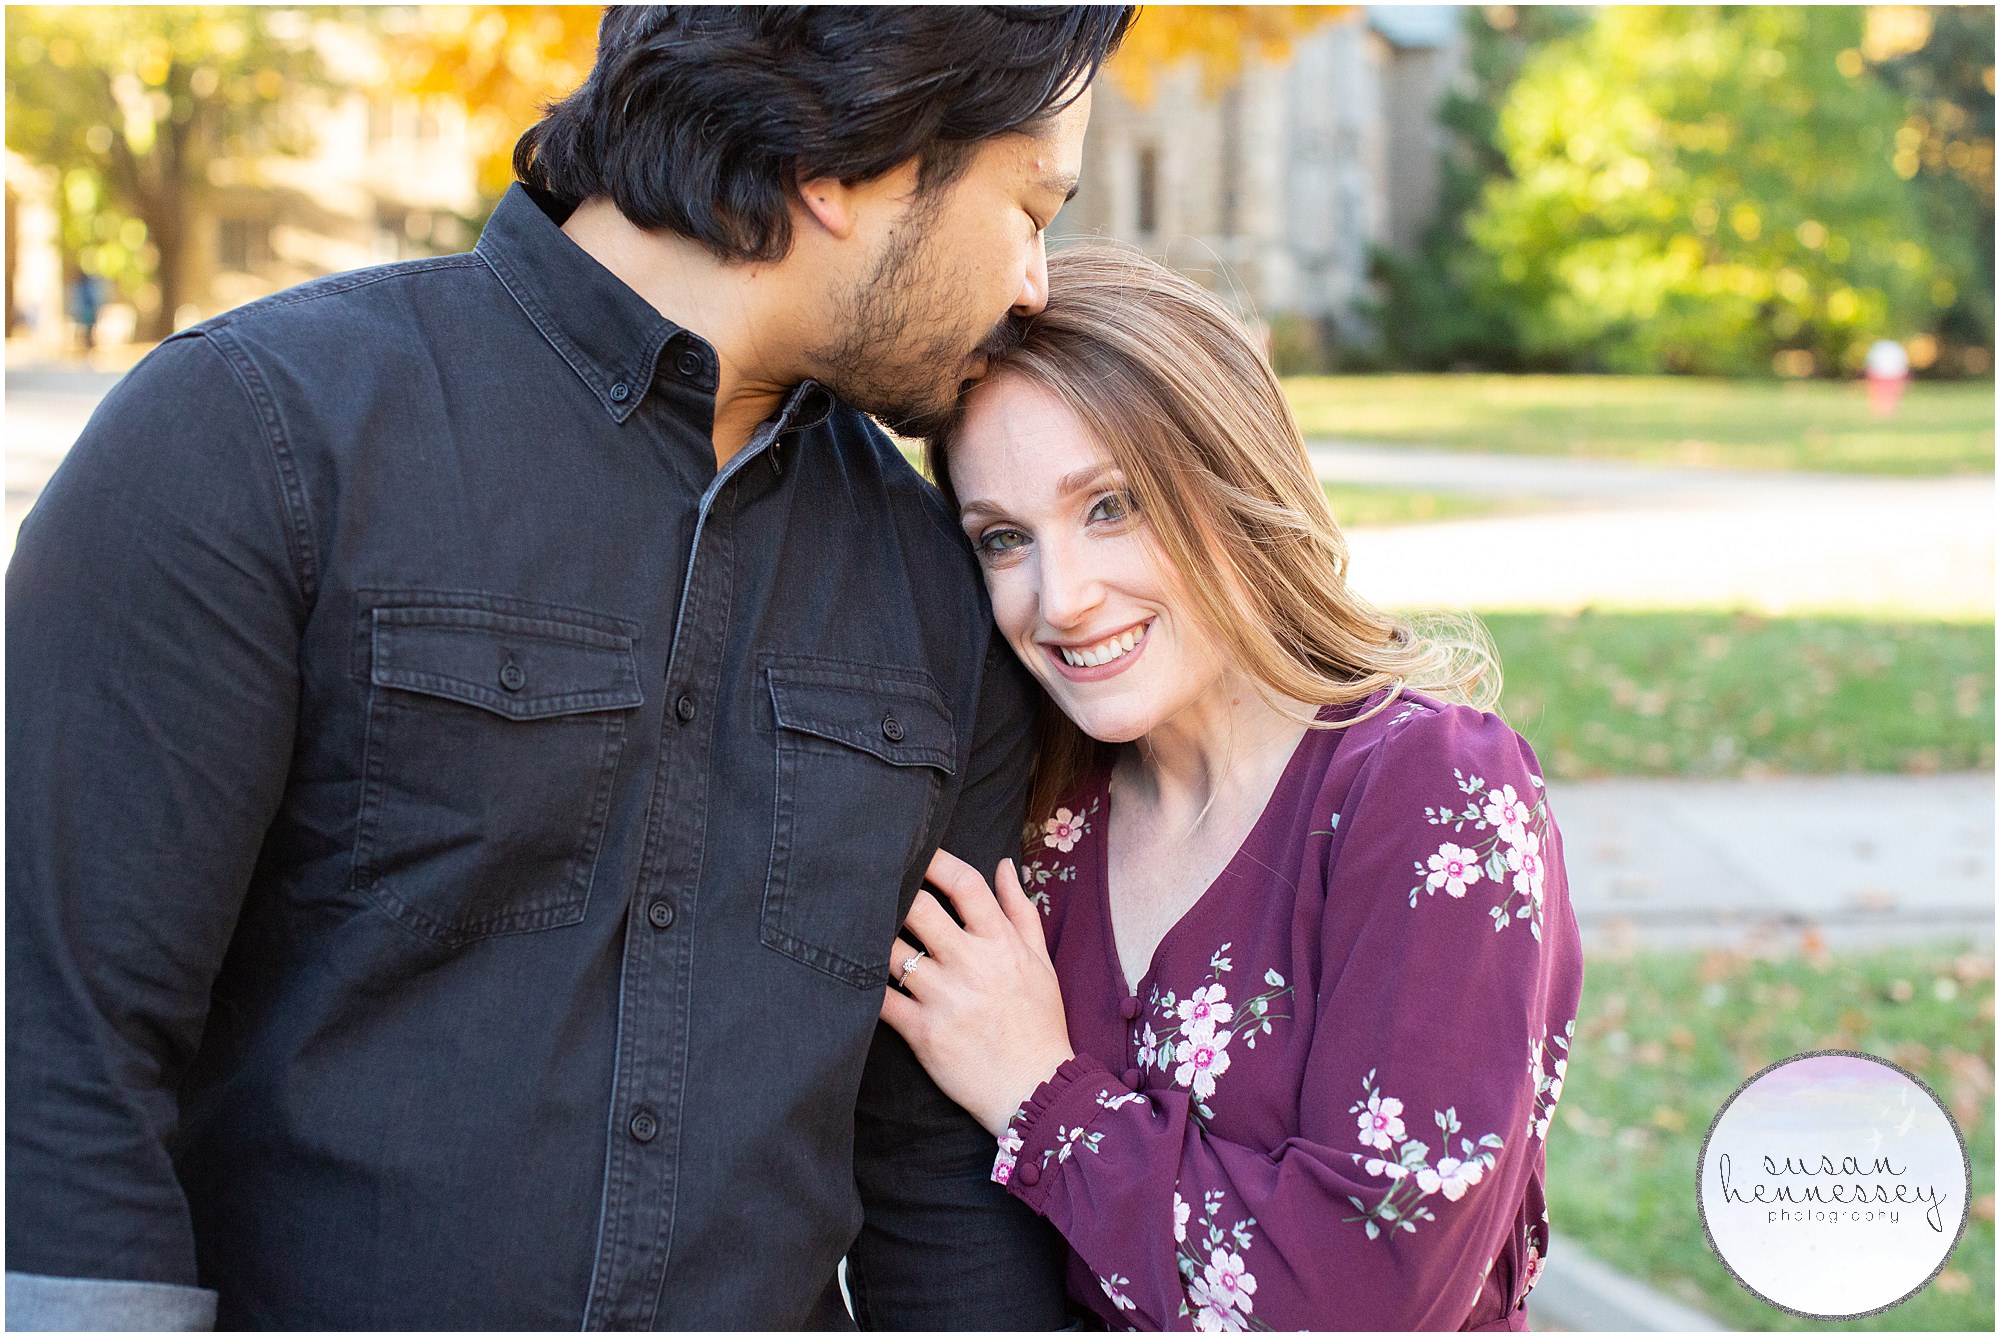 A happy fall engagement session in Princeton, NJ